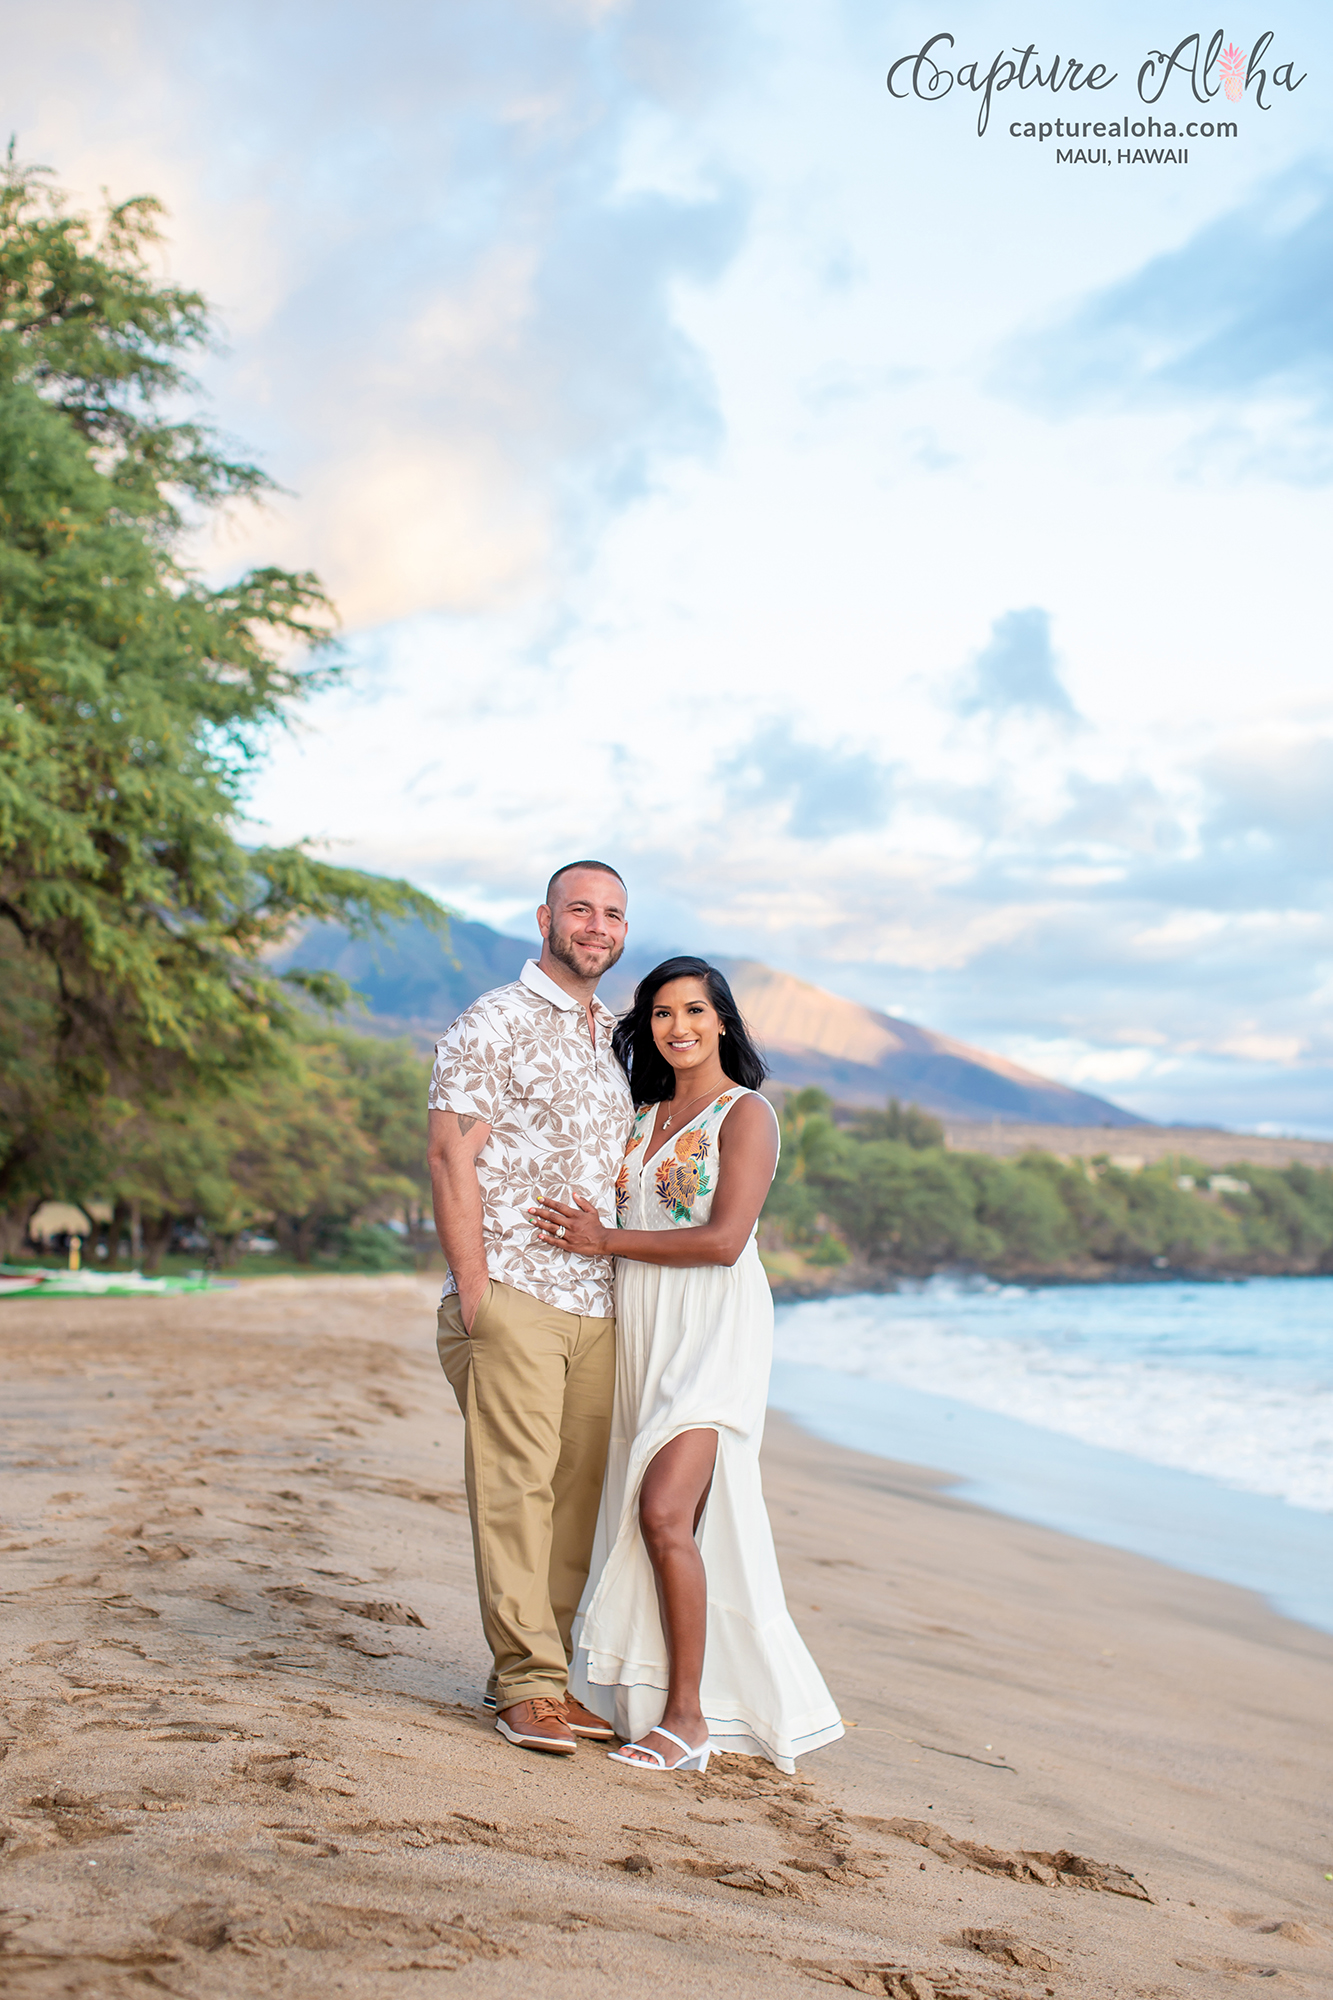 A couple on the beach in Maui with West Maui mountains behind them